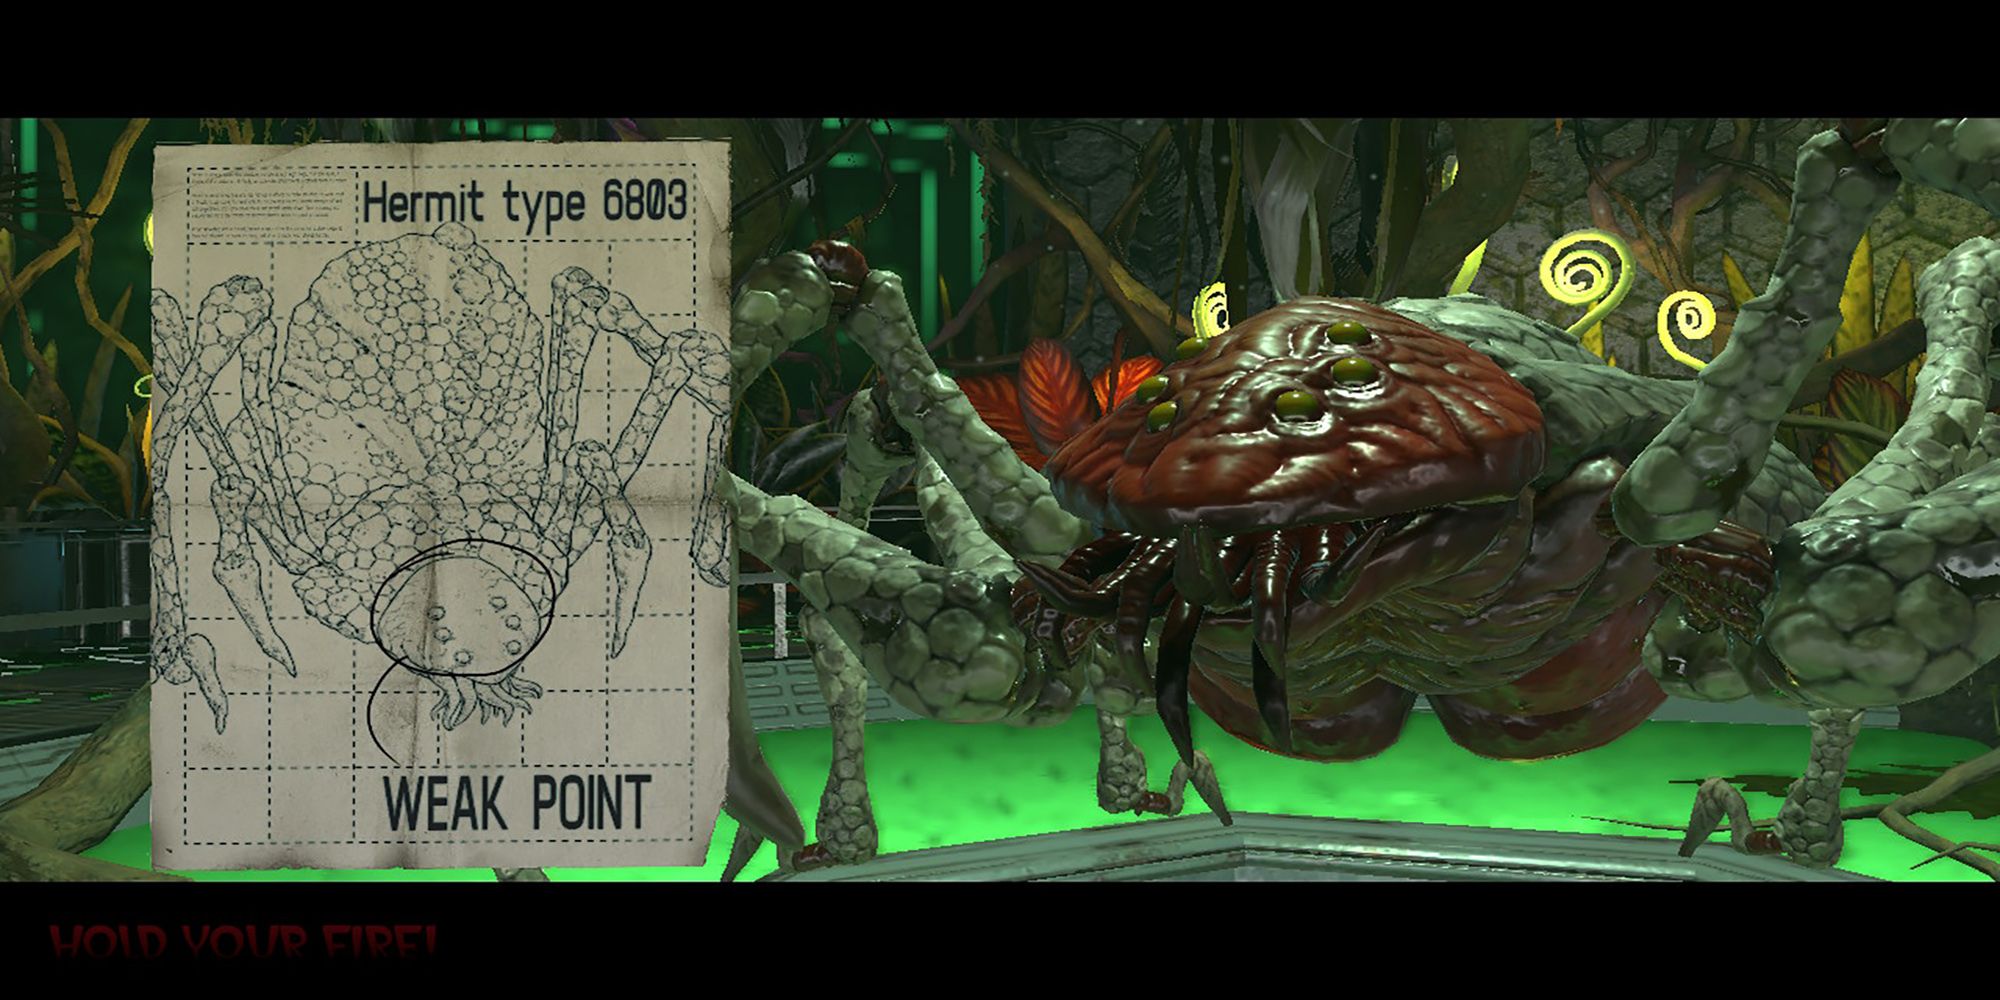 The introduction to Hermit in Curien's laboratory, along with its weak point diagram, in The House Of The Dead: Remake.